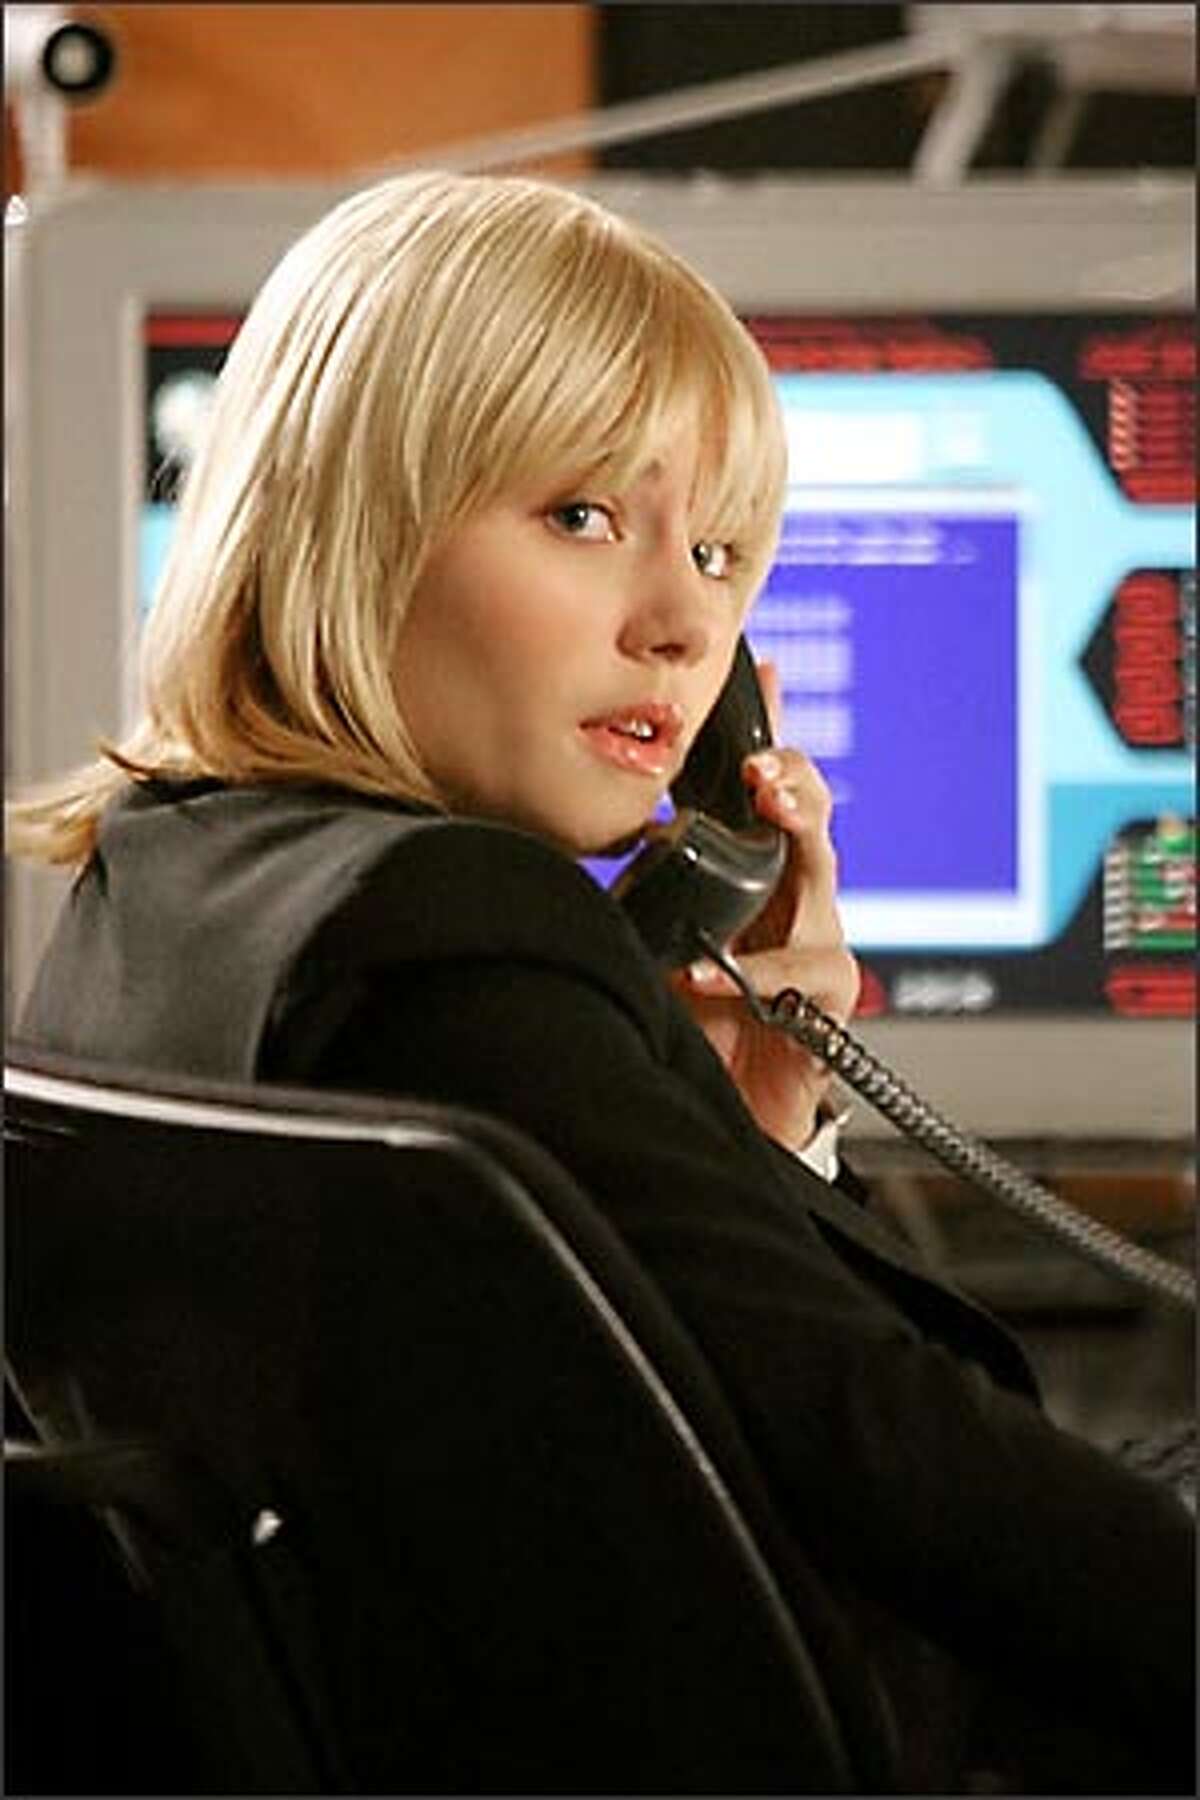 Talk about implausible plot twists: accident-prone Kim Bauer (Elisha Cuthbert) now works for CTU.